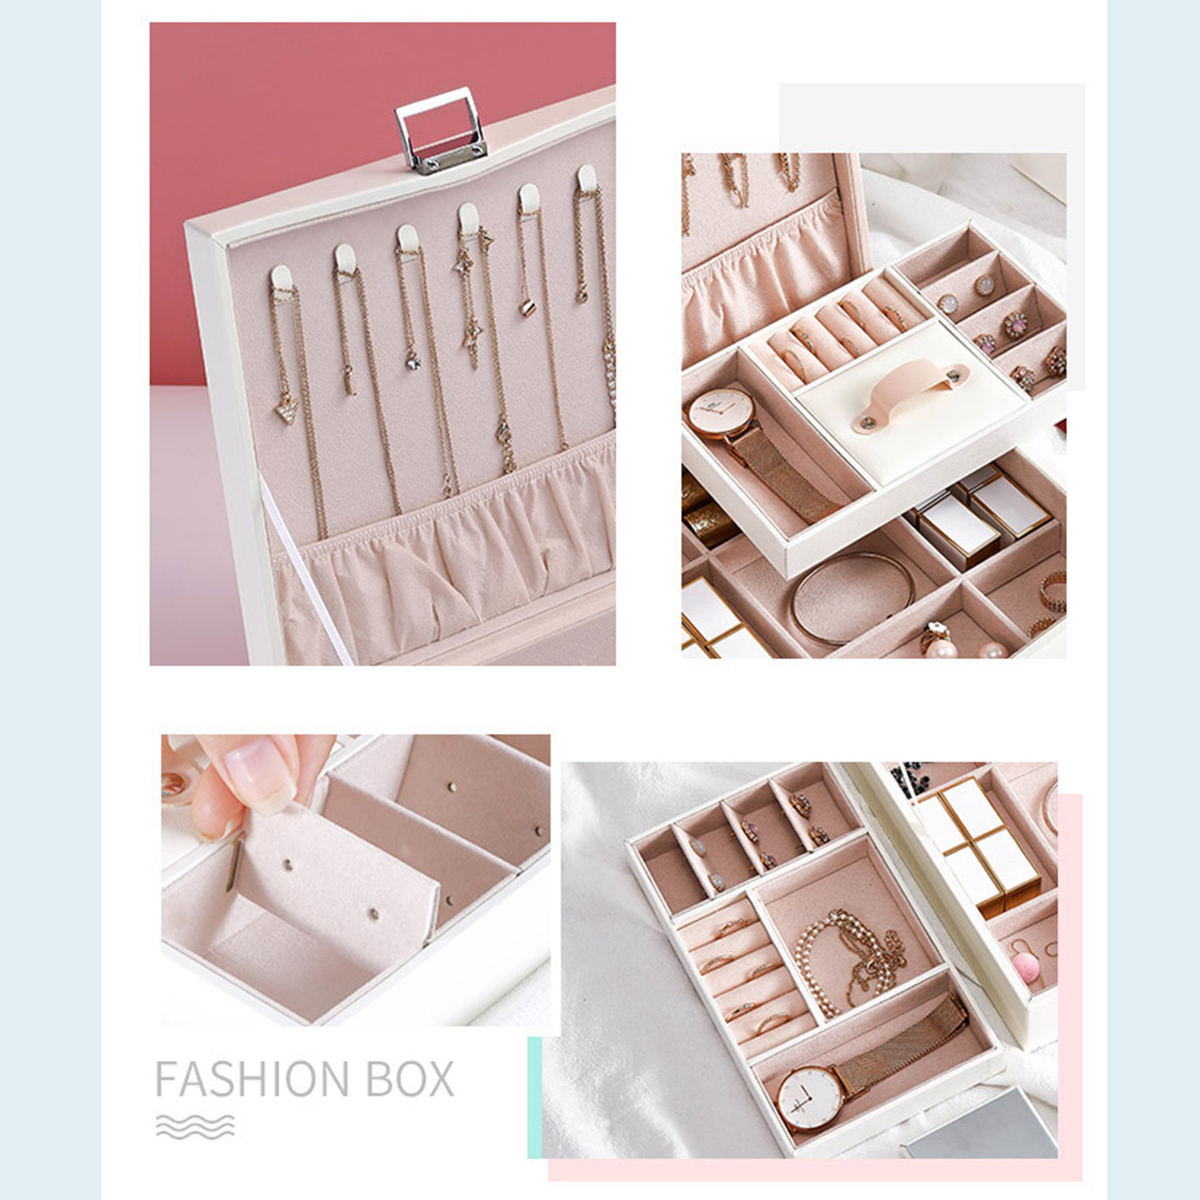 Flannel-Square-Jewelry-Box-Simple-Layout-2-Layers-Makeup-Organizer-Choker-Ring-Necklace-Storage-Box-1493604-6